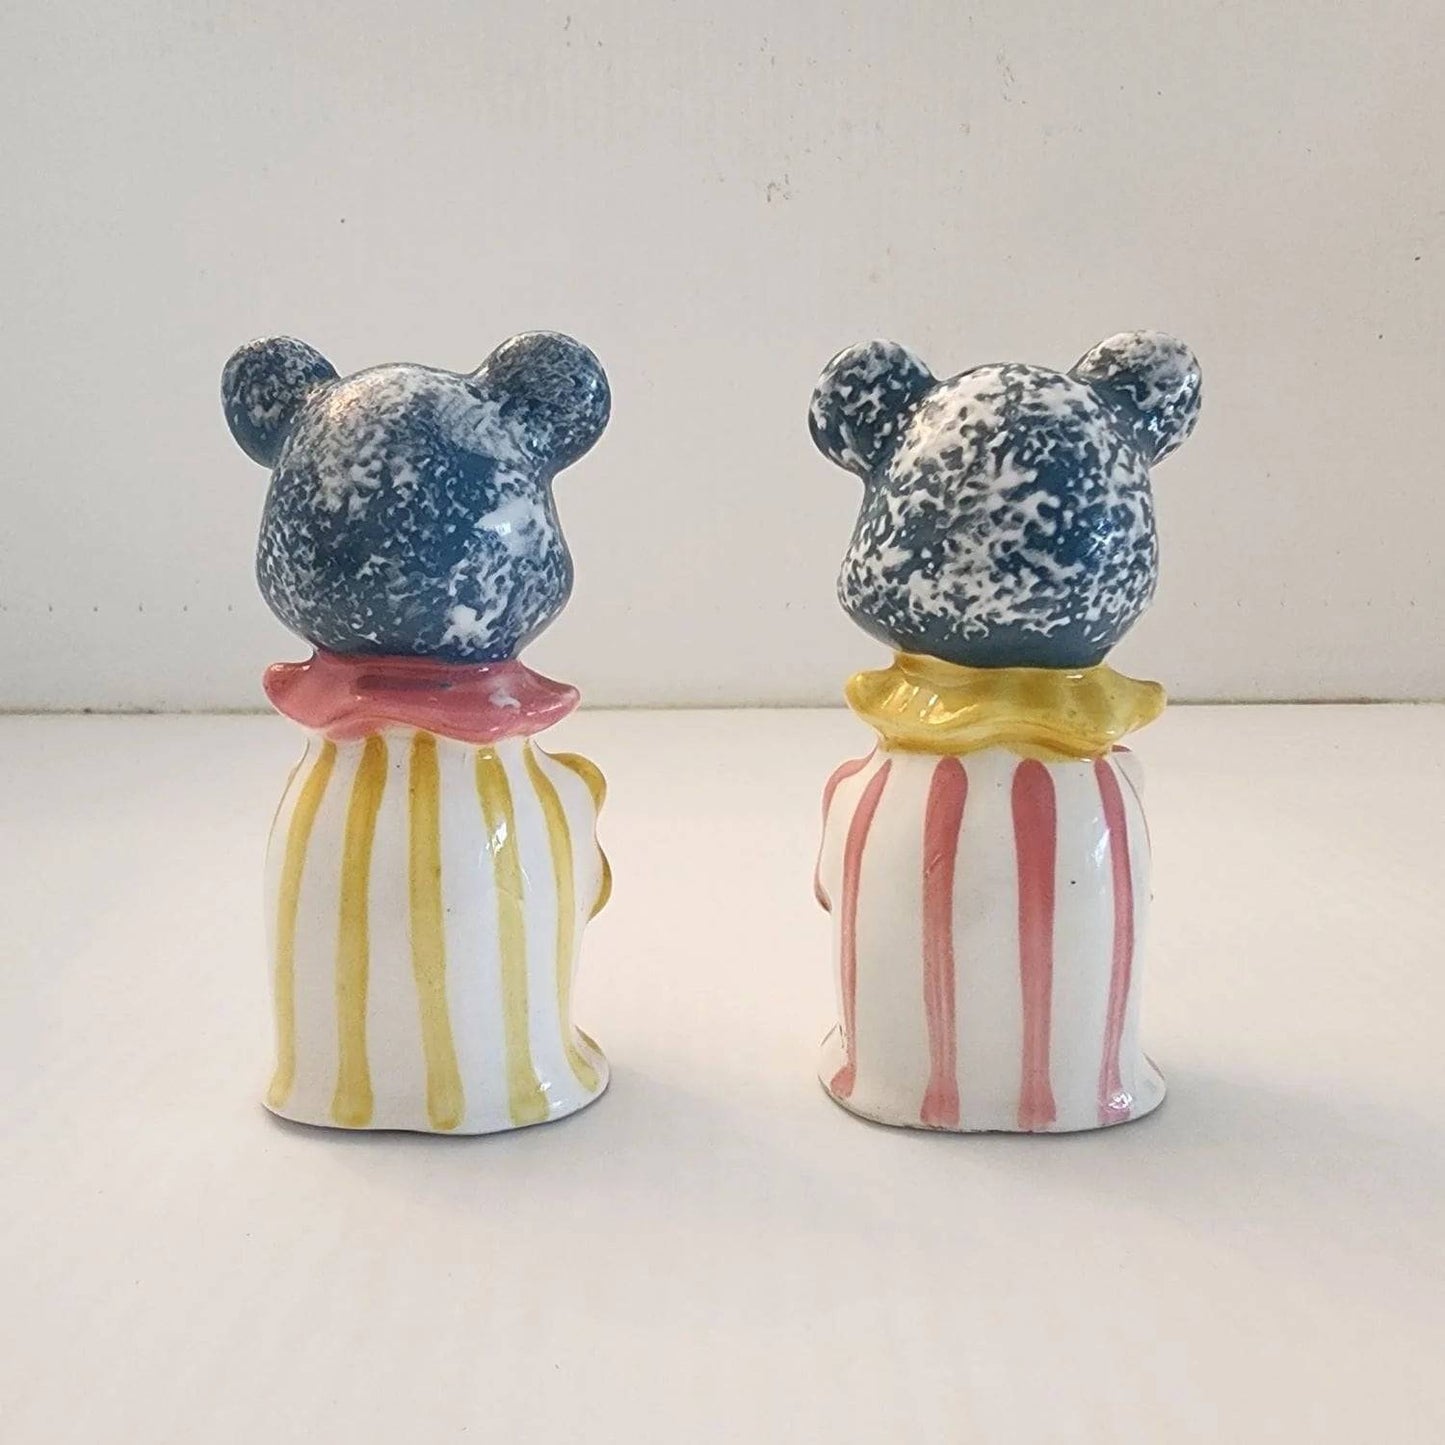 Mice Vintage Salt and Pepper Shaker Set pink blue and yellow